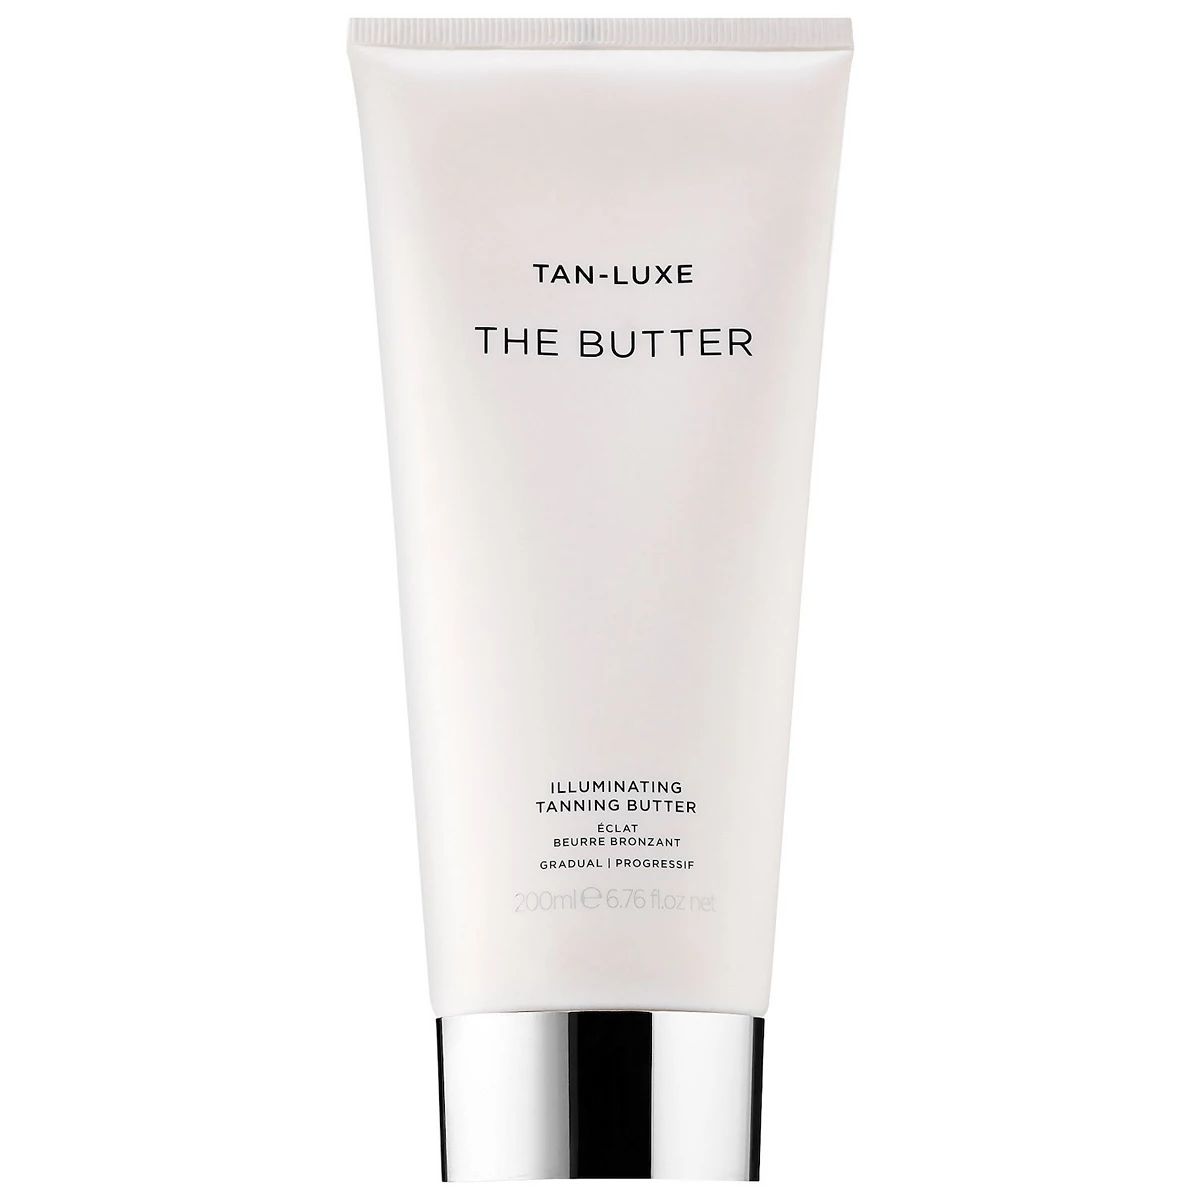 TAN-LUXE THE BUTTER Illuminating Tanning Butter | Kohl's